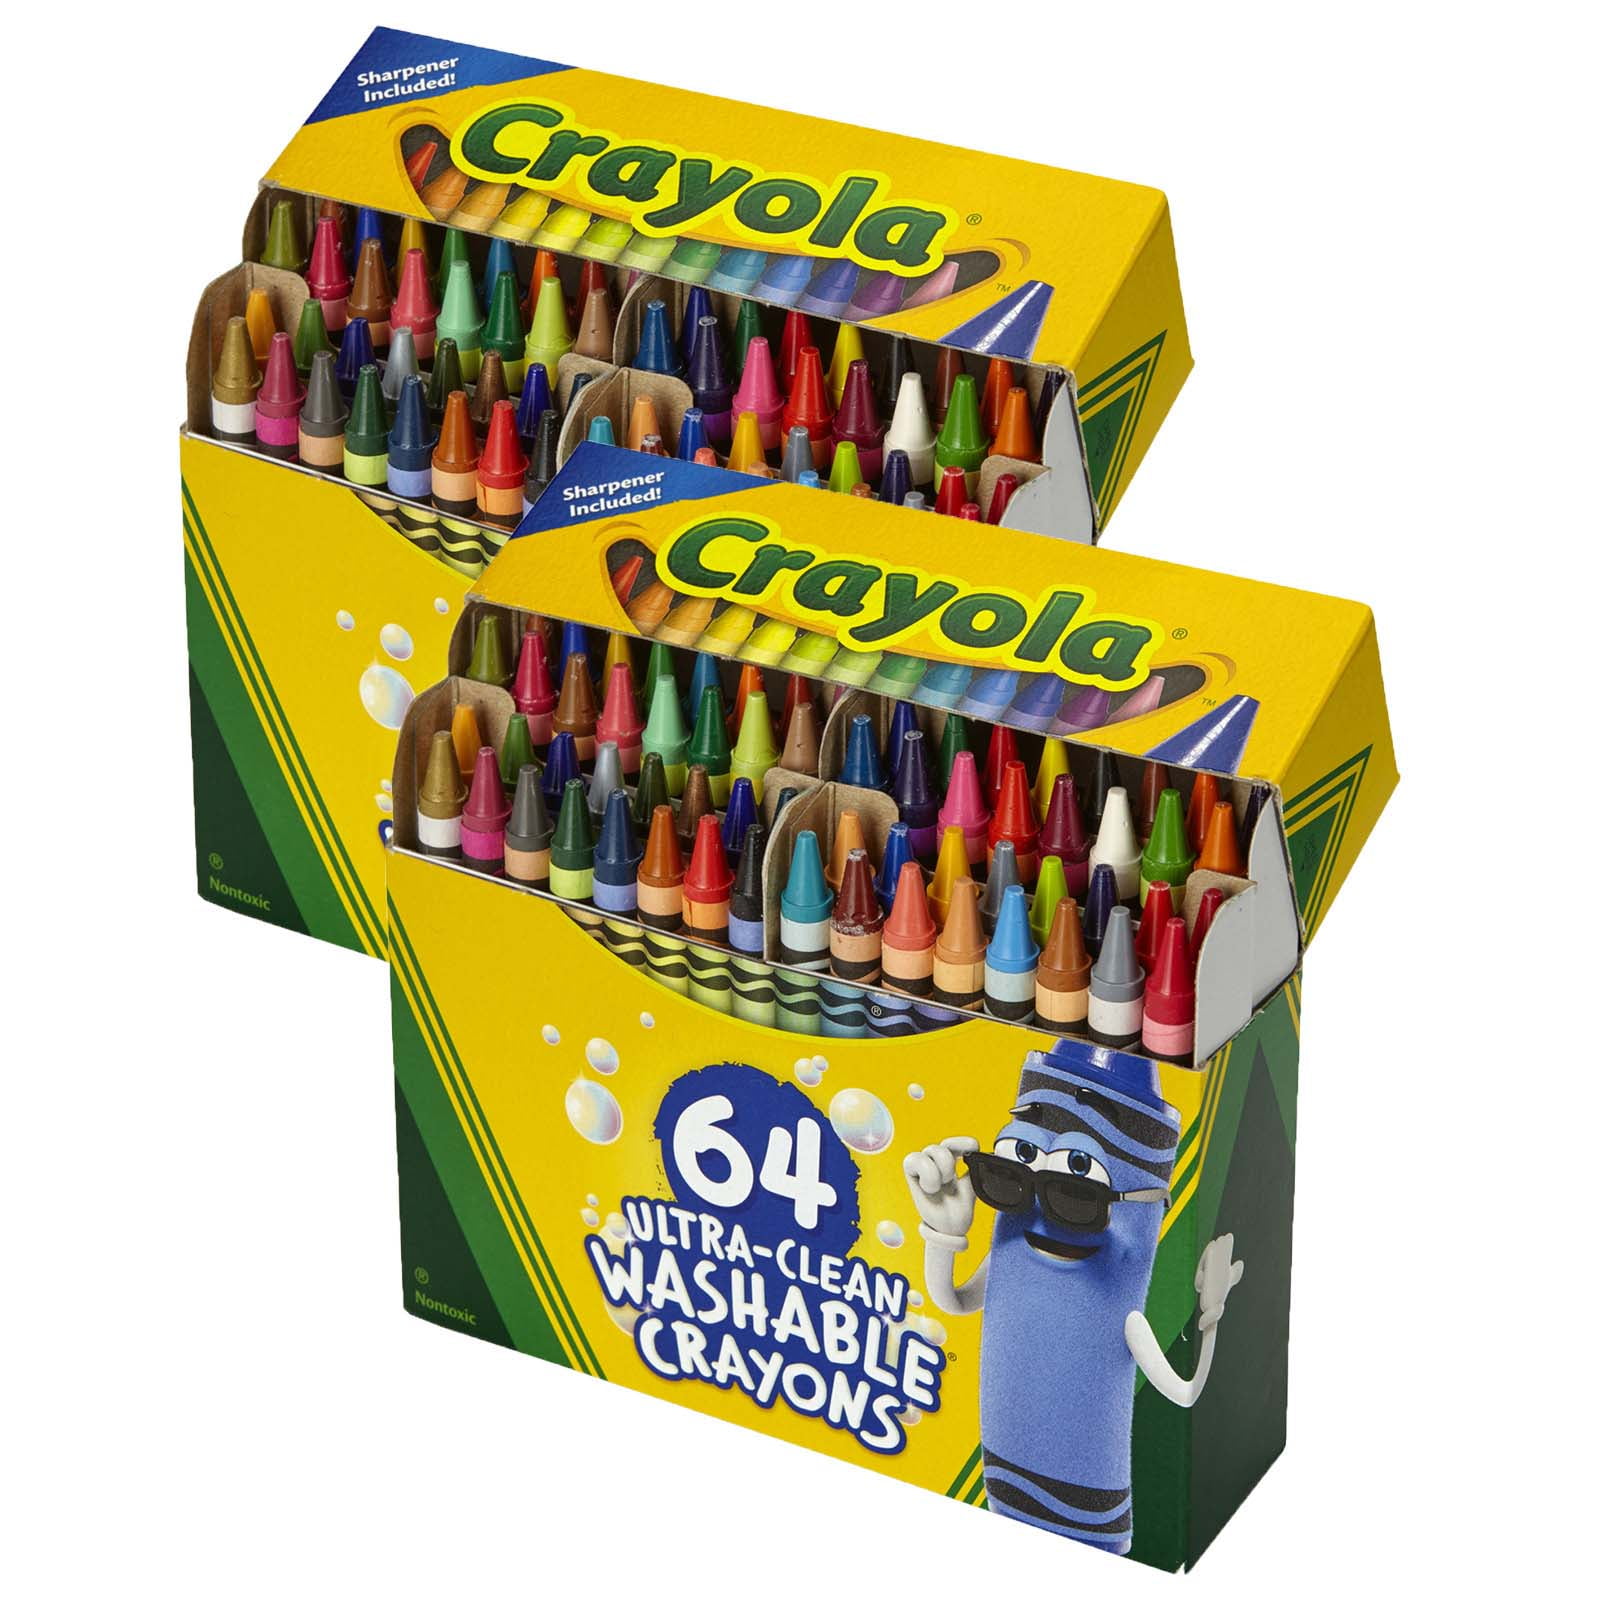 Crayola Crayons (100+ products) compare prices today »